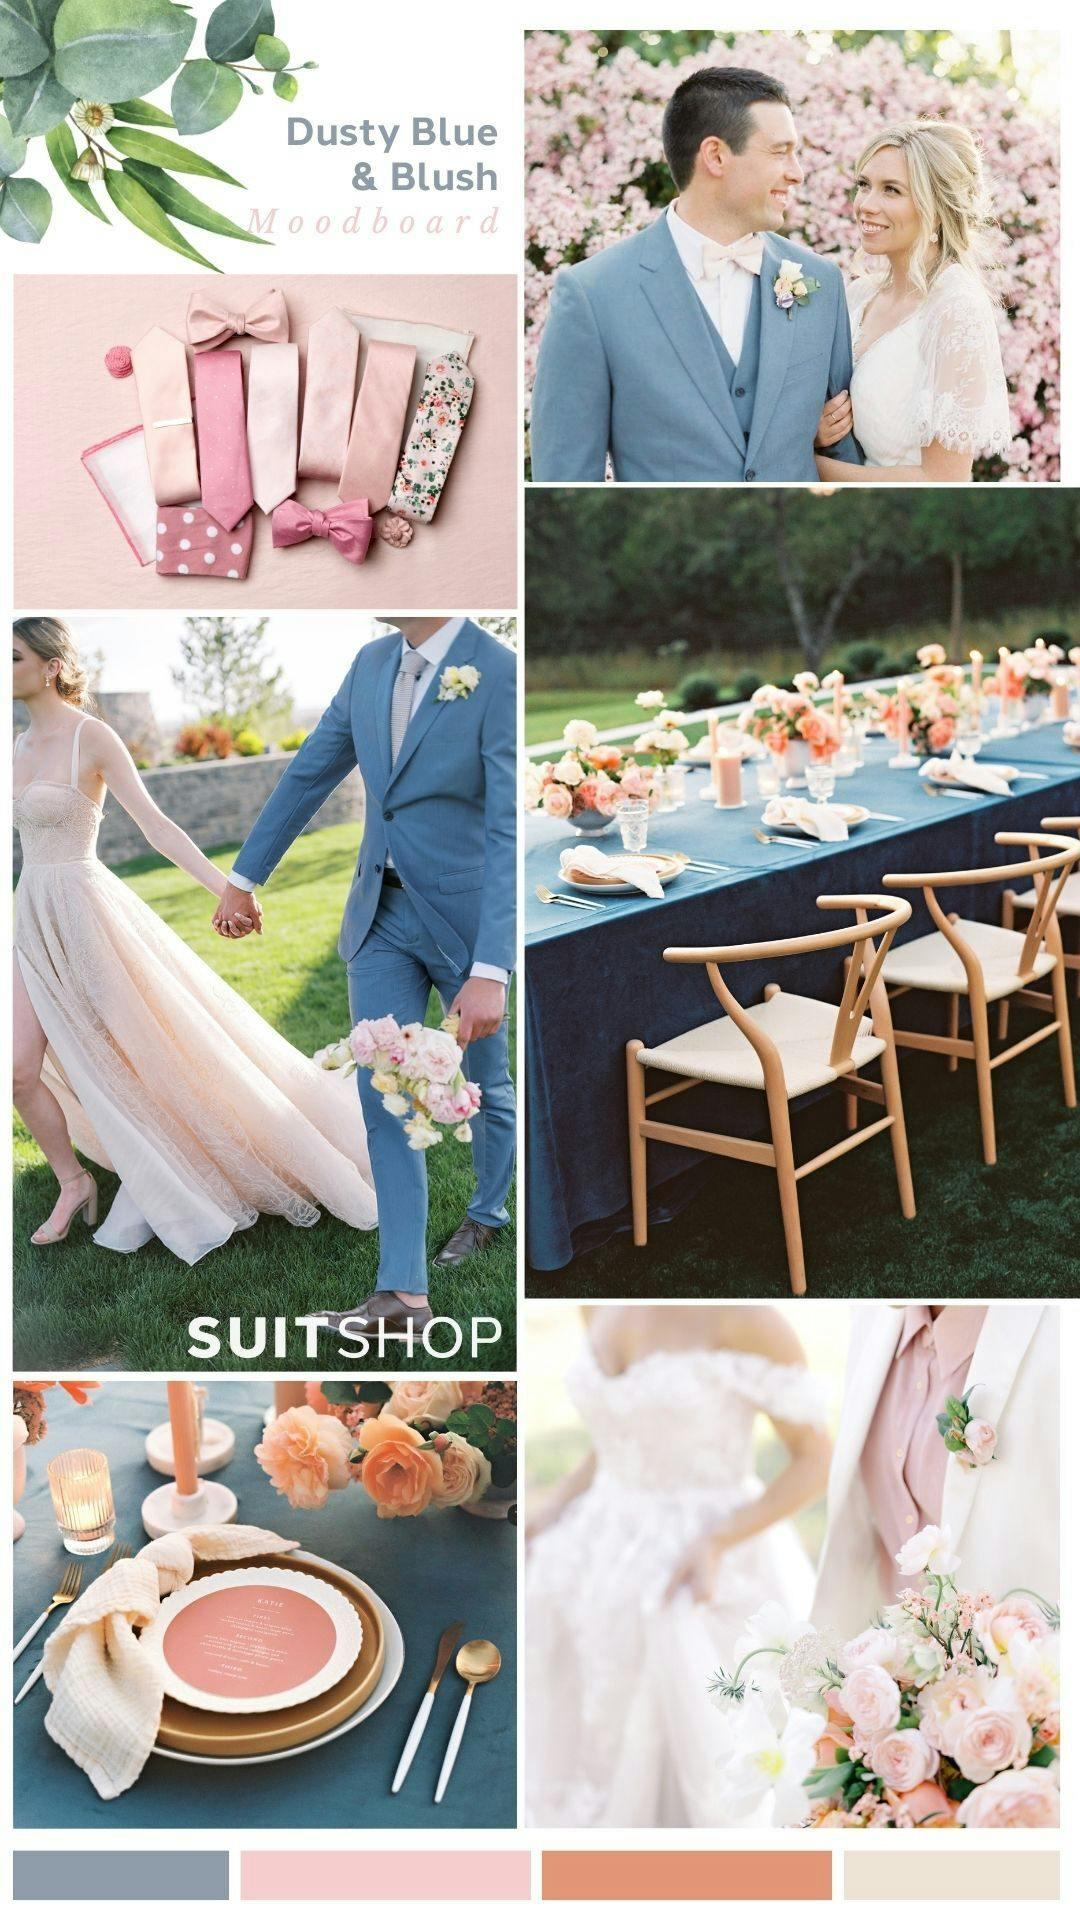 Dusty blue and blush pink wedding colors with light blue wedding suit, light pink gown, and pale pink wedding accessories and bouquets.